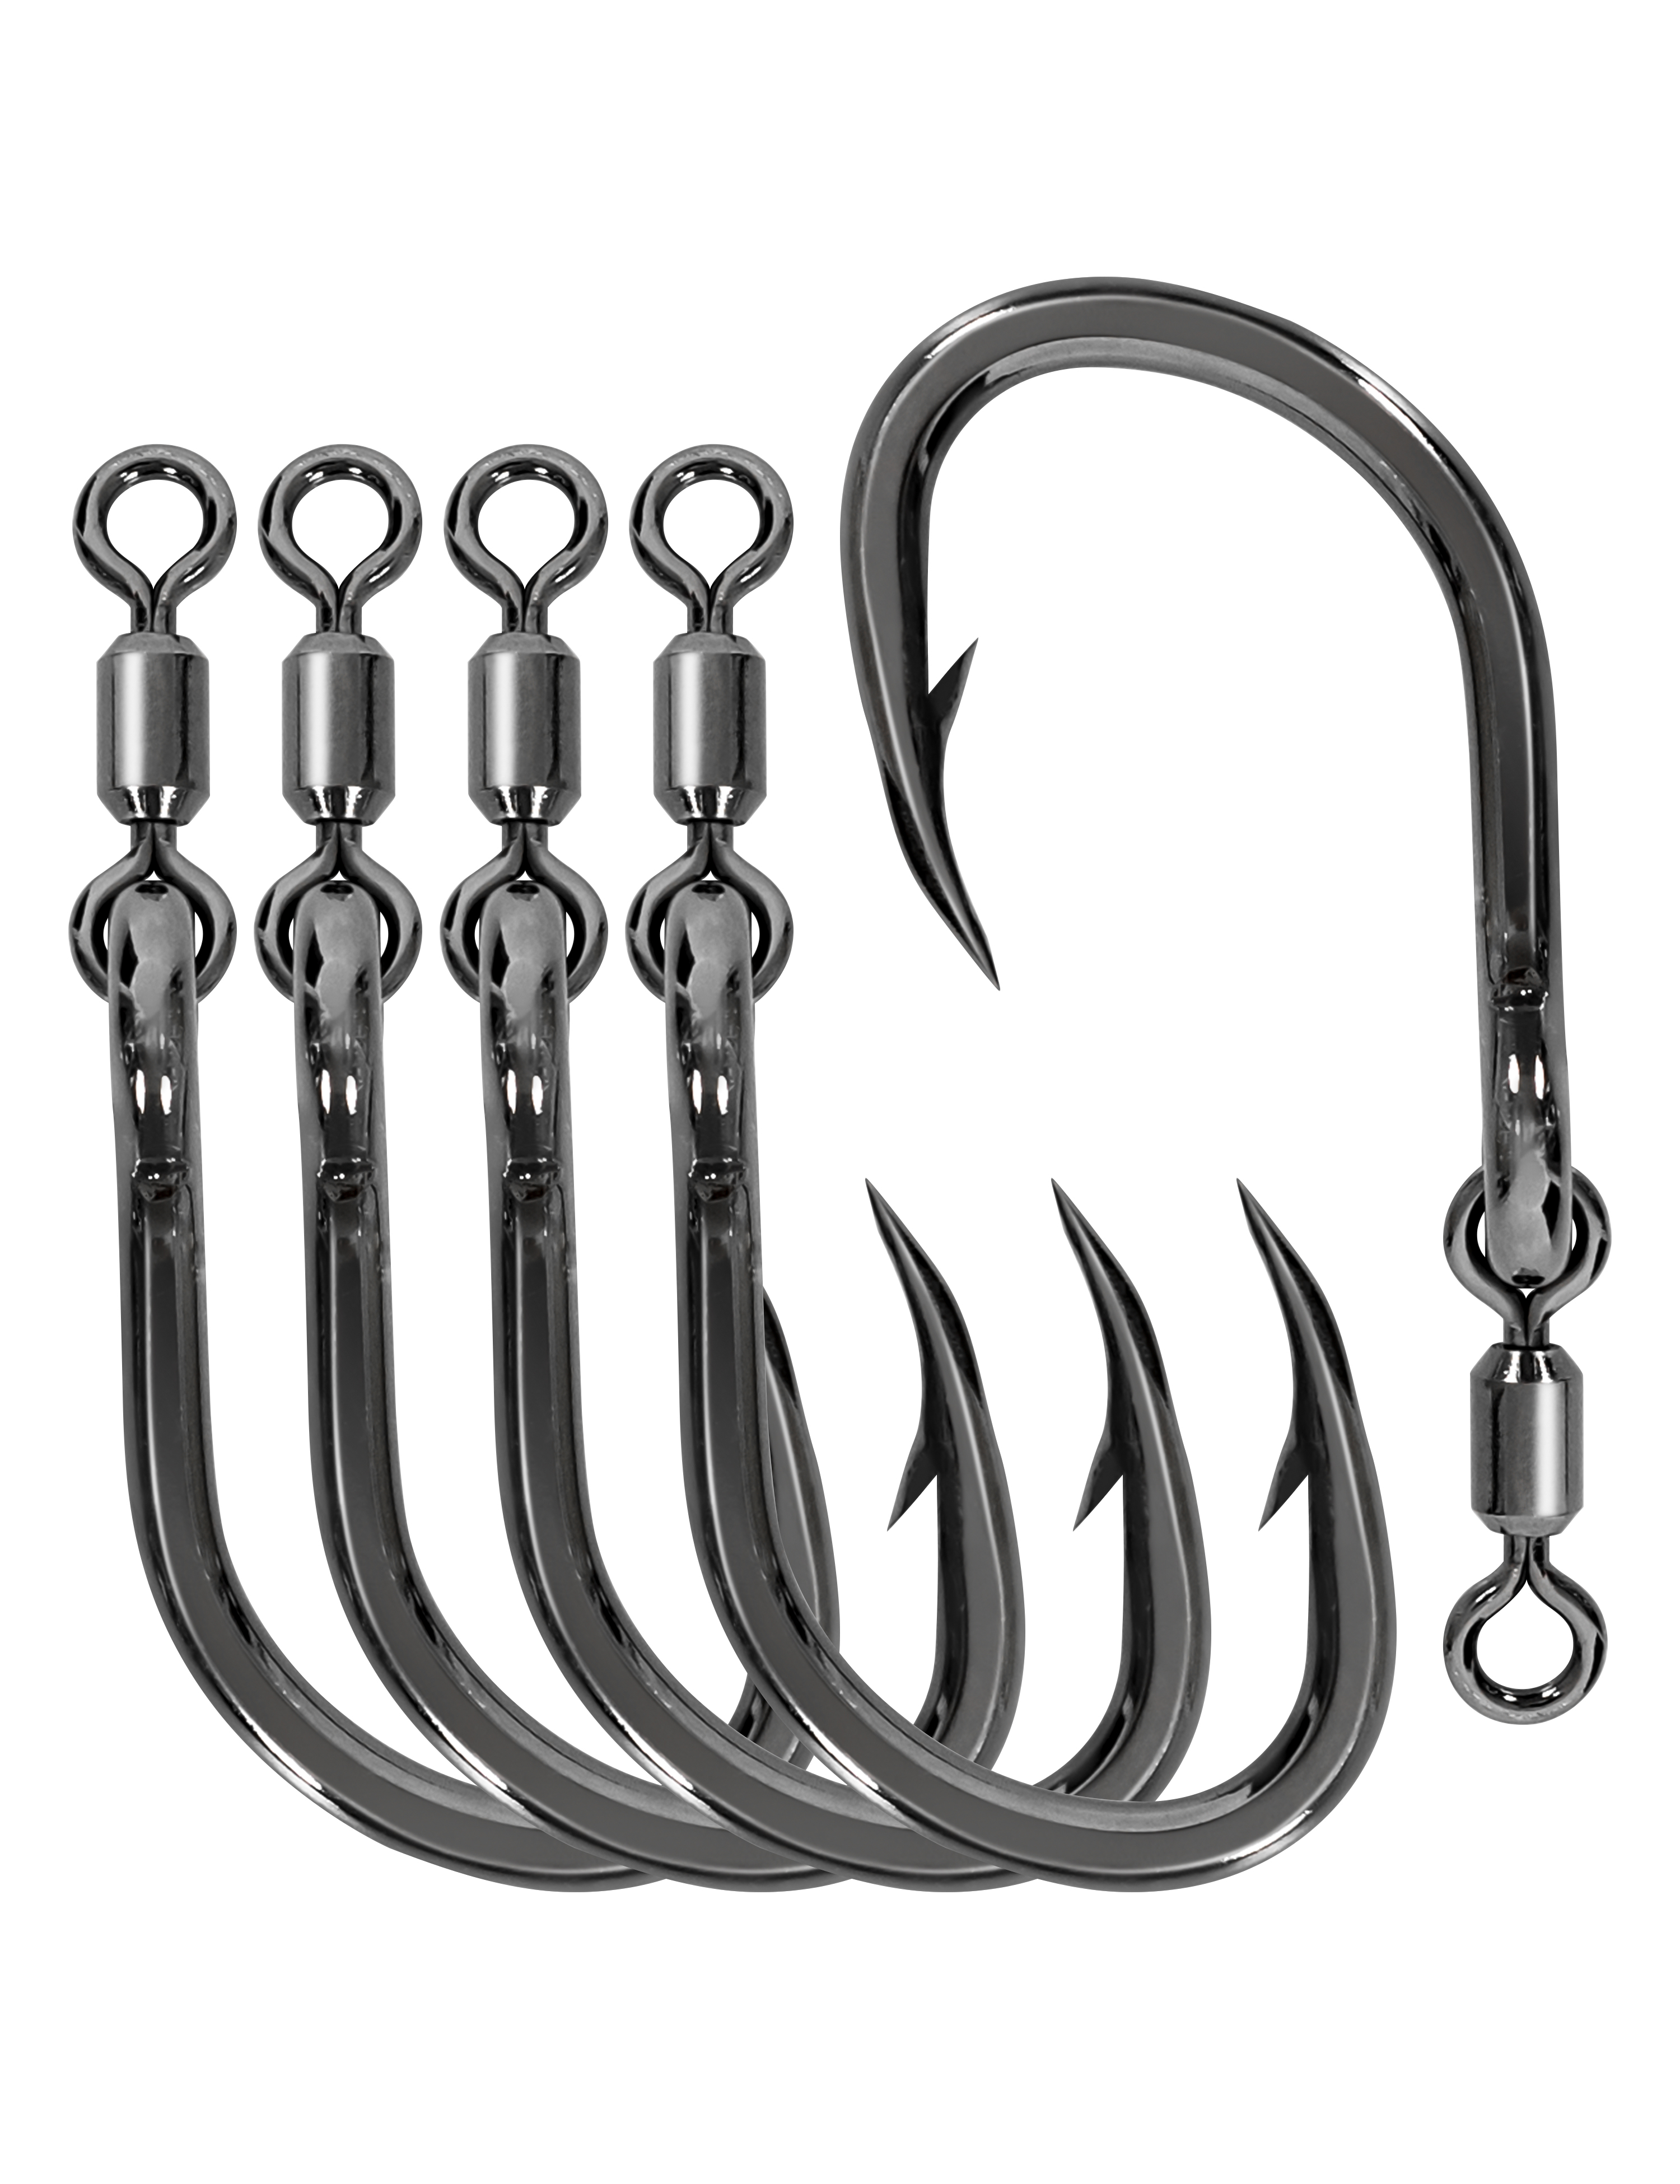 5Pcs Snagging Hooks High Carbon Steel Weighted Treble Hooks